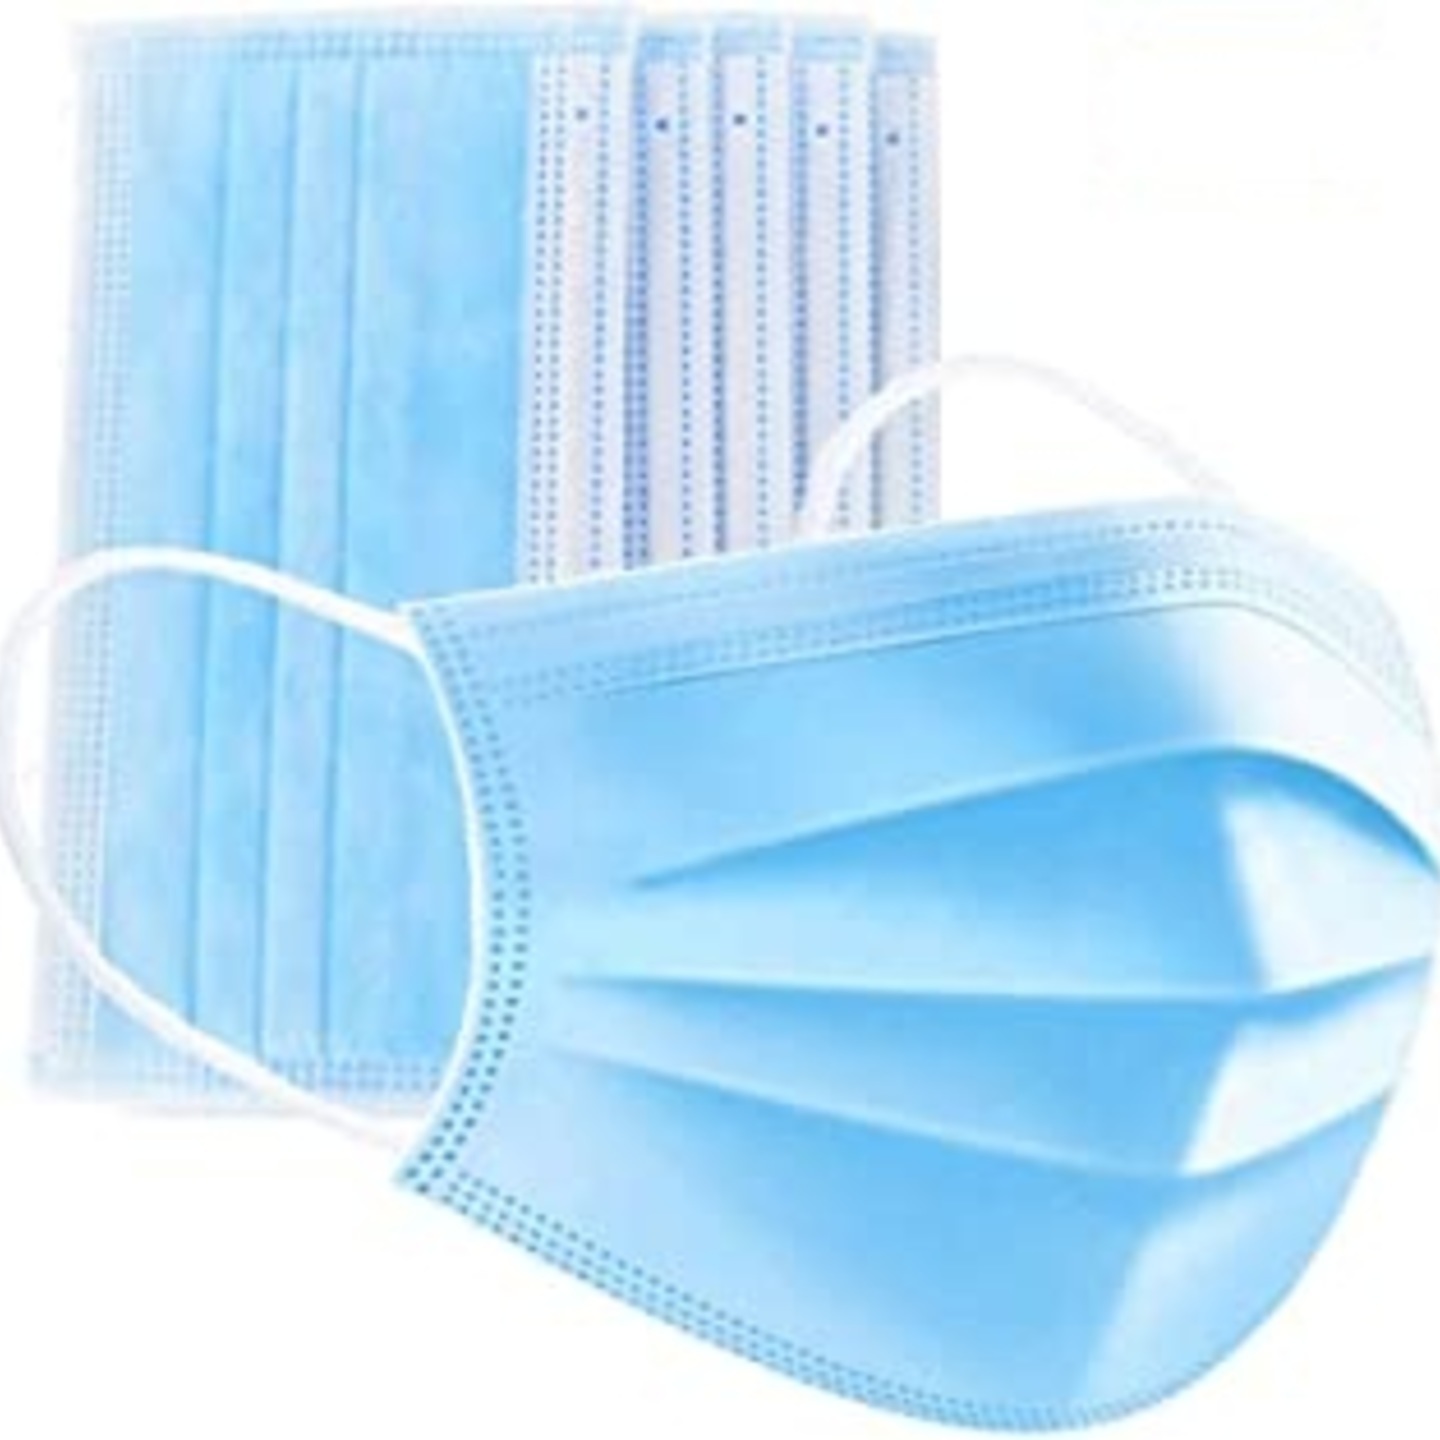 3 Layer Filter, 3 Ply Filter Breathable Safety Mask with Elastic Ear loop (10 Pcs) (10)